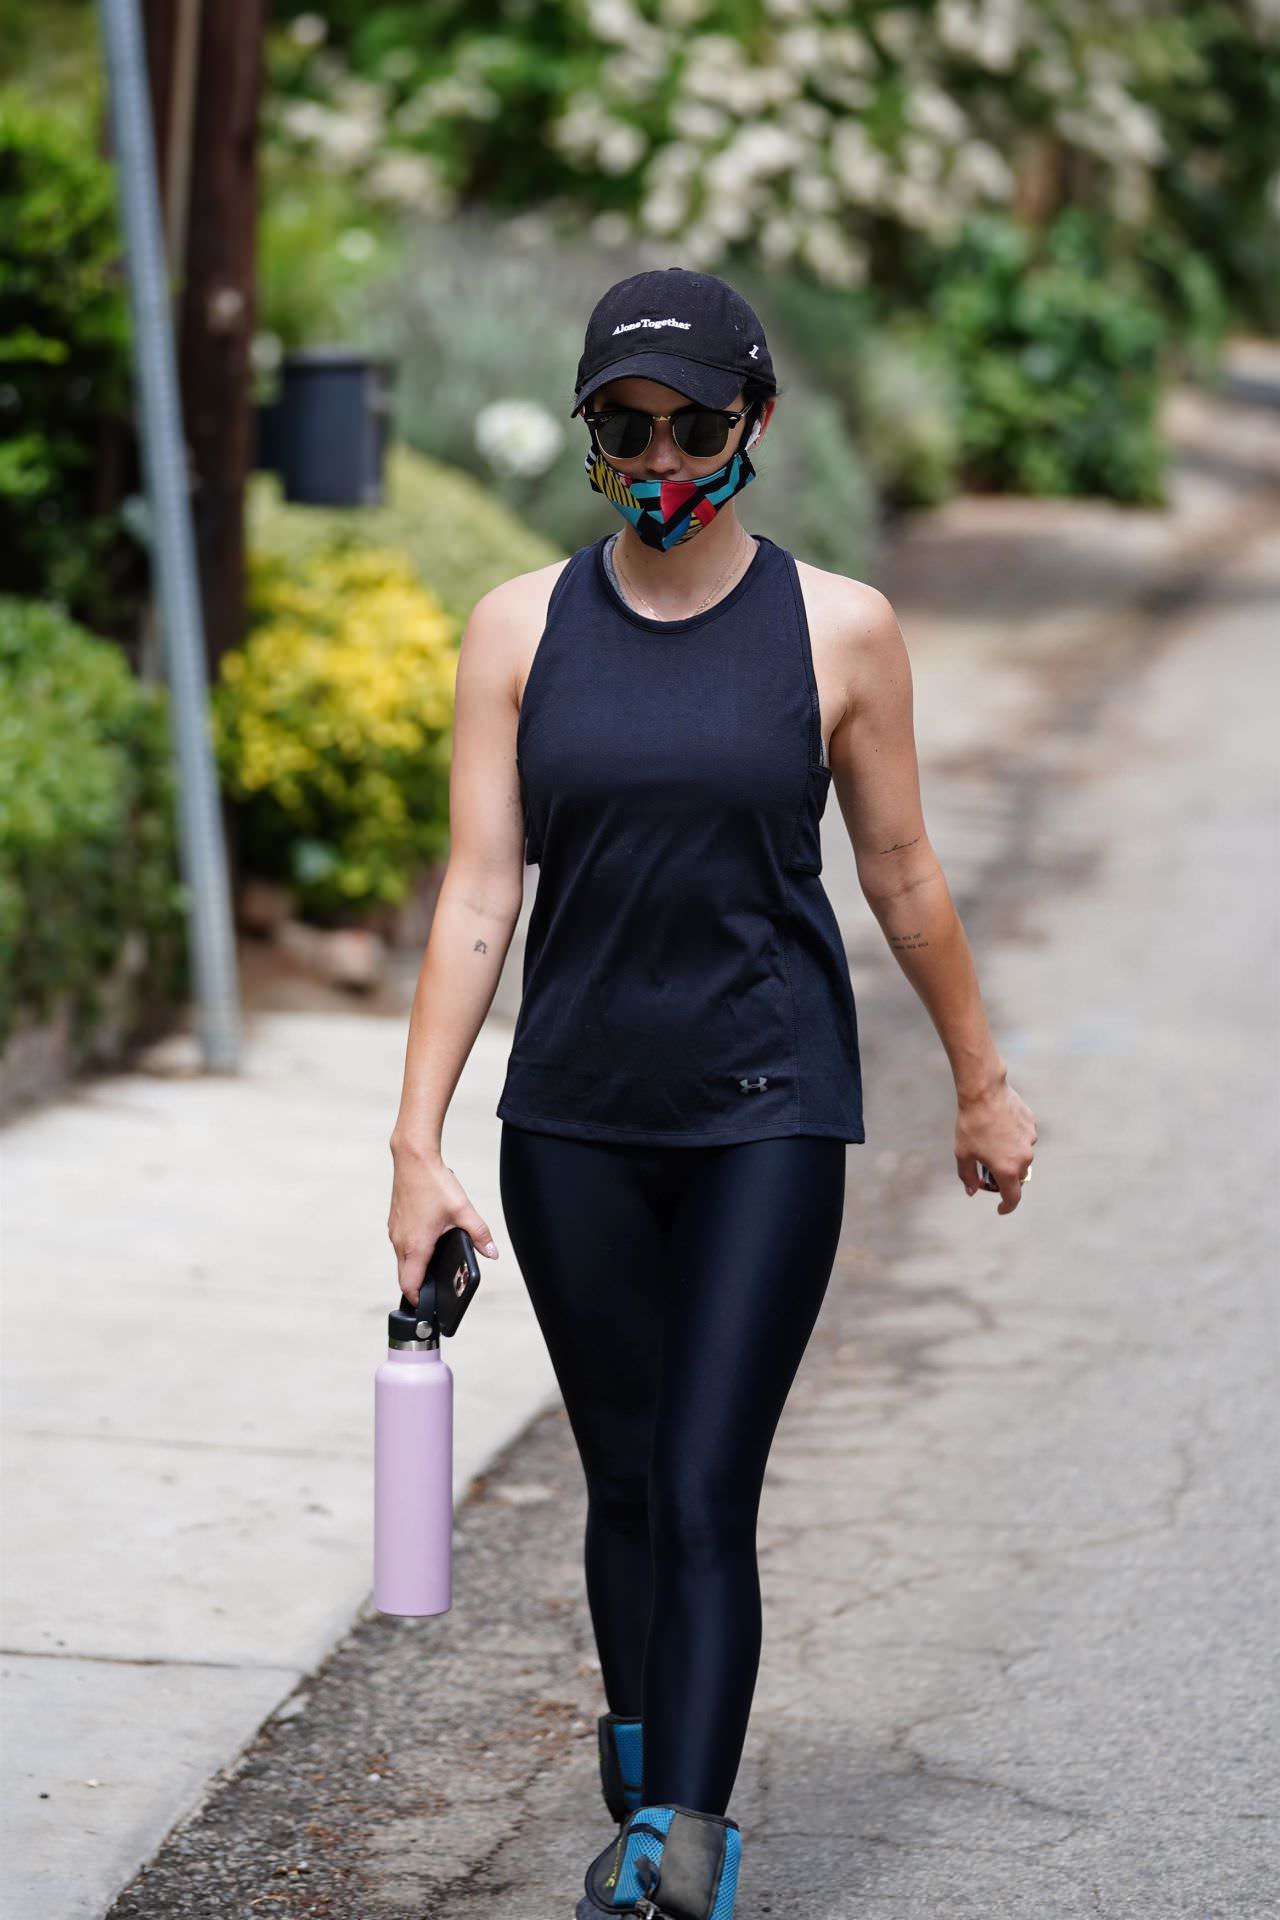 Lucy Hale Rocks a Sporty Figure in Leggings and Tank Top